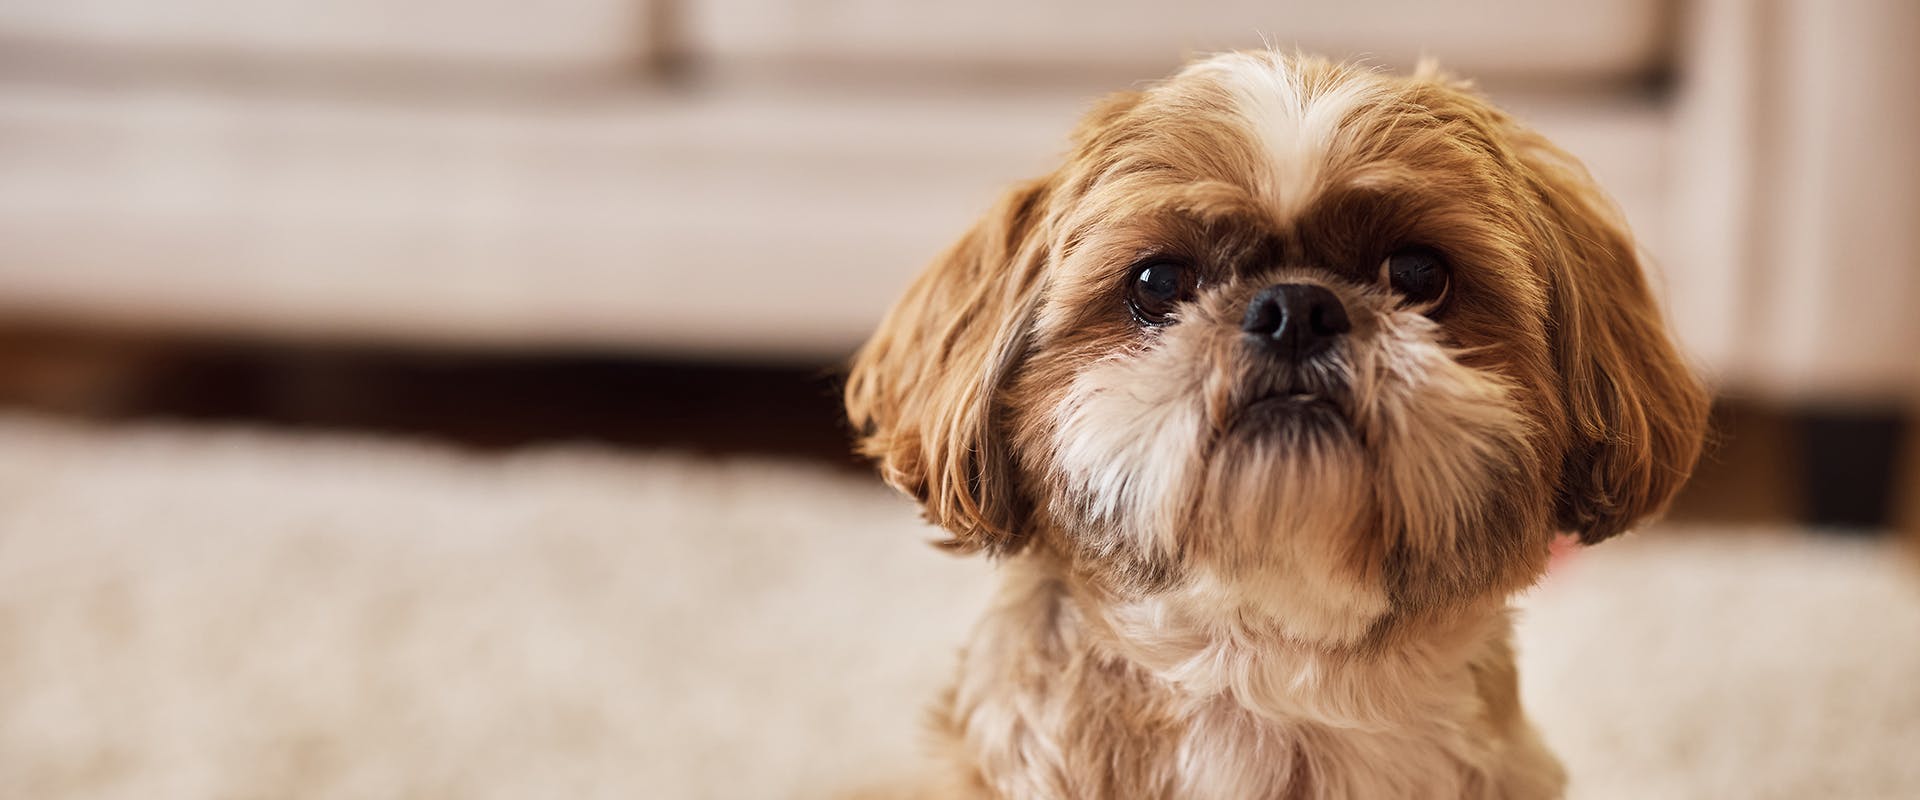 A small Shih Tzu dog with floppy ears